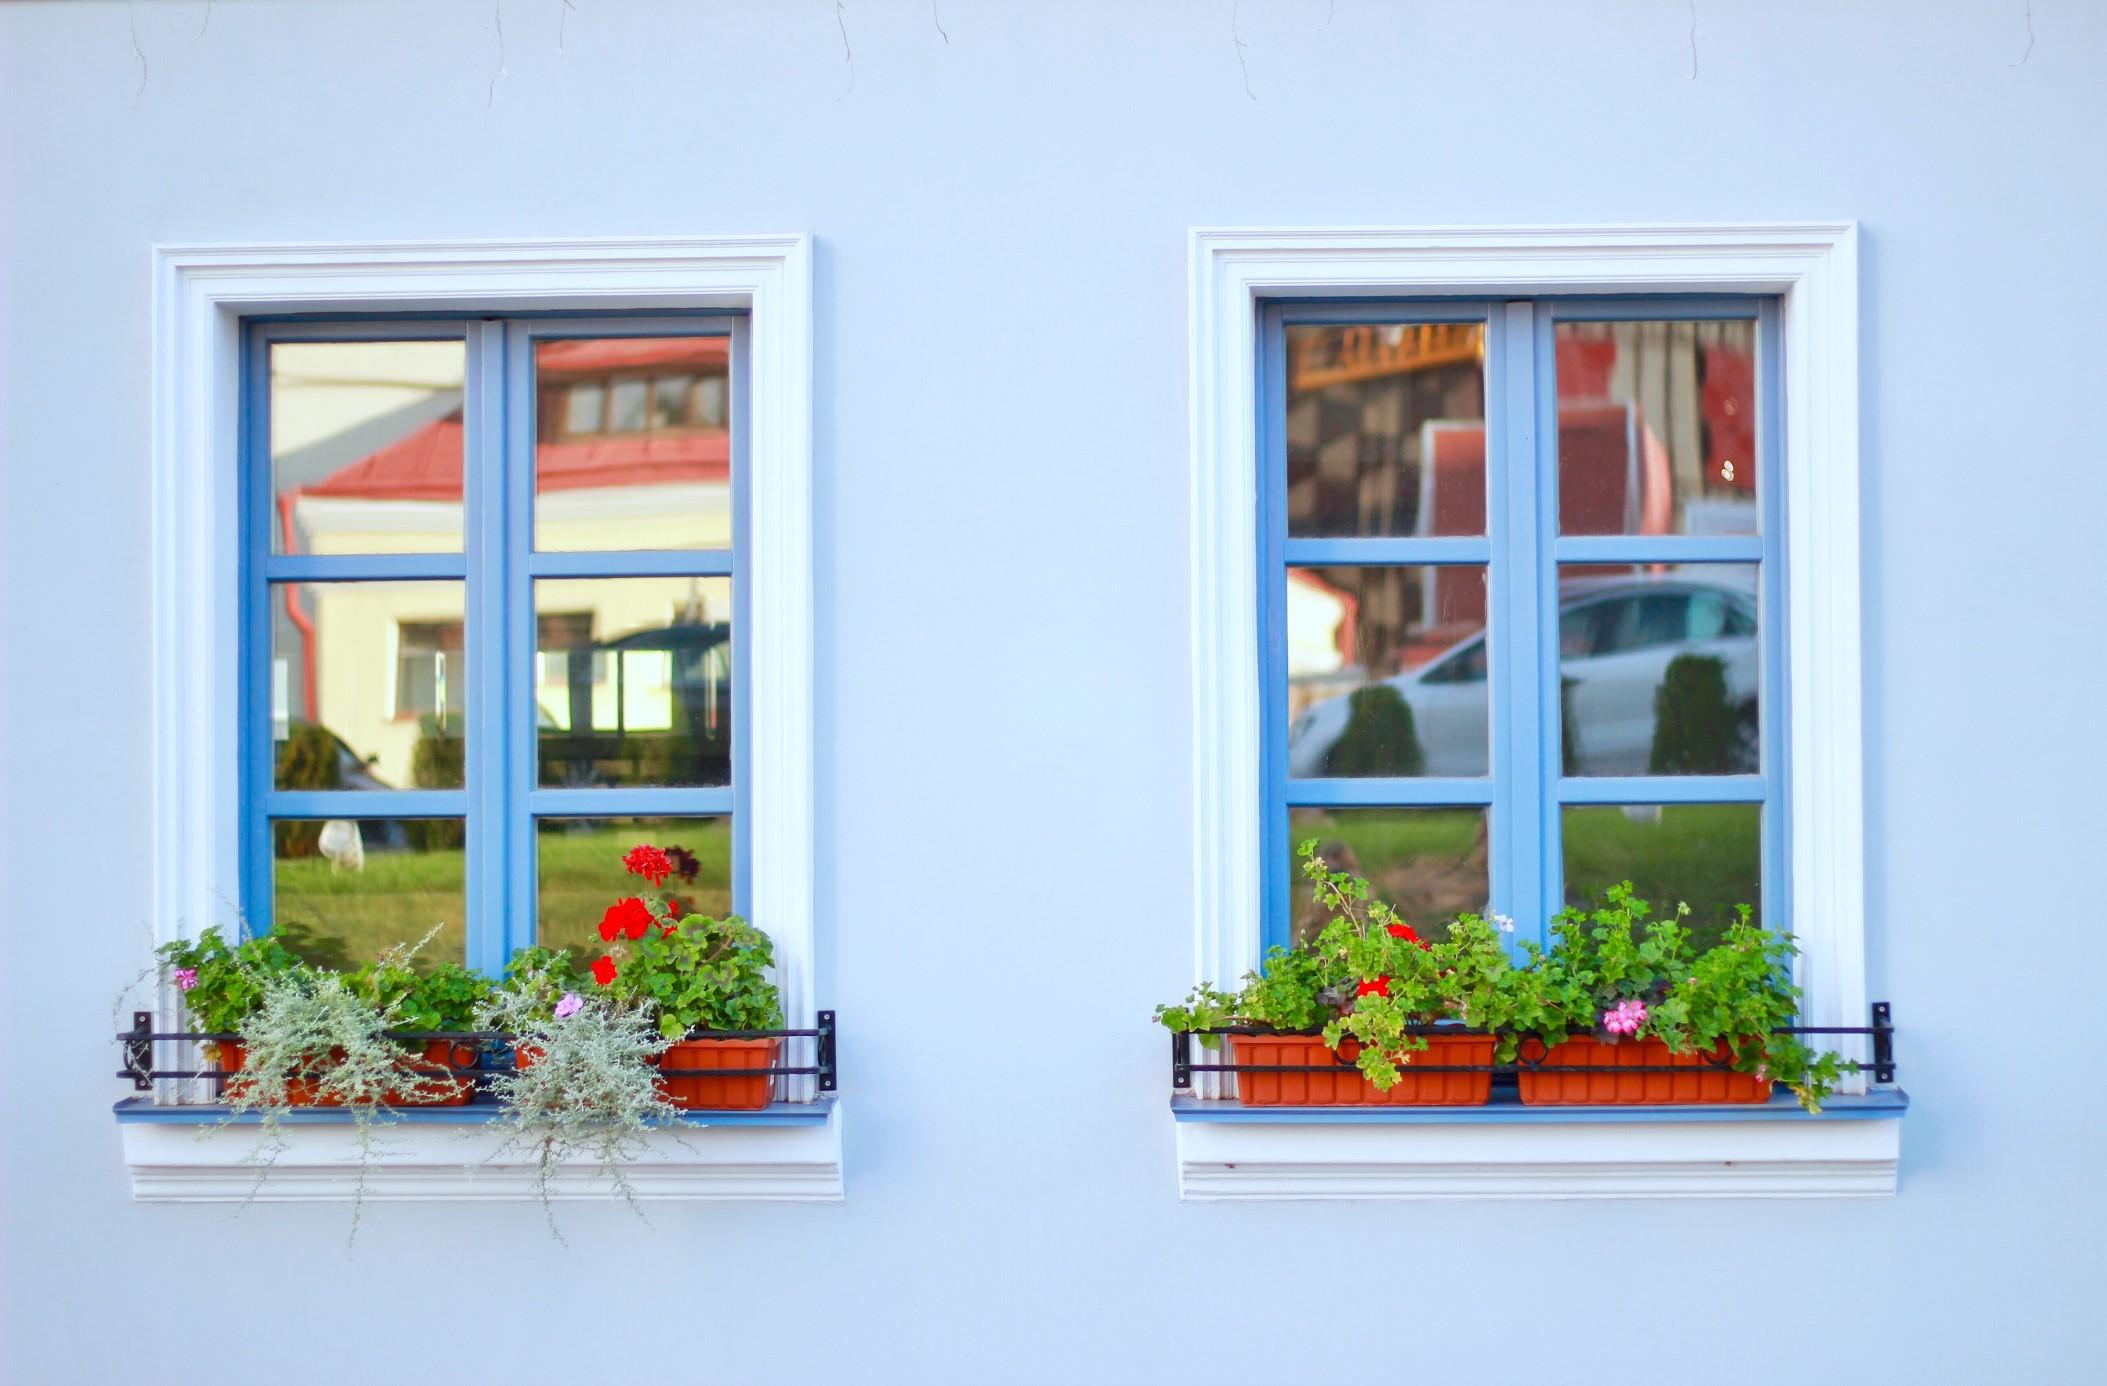 Adding flower boxes can add life to your windows.